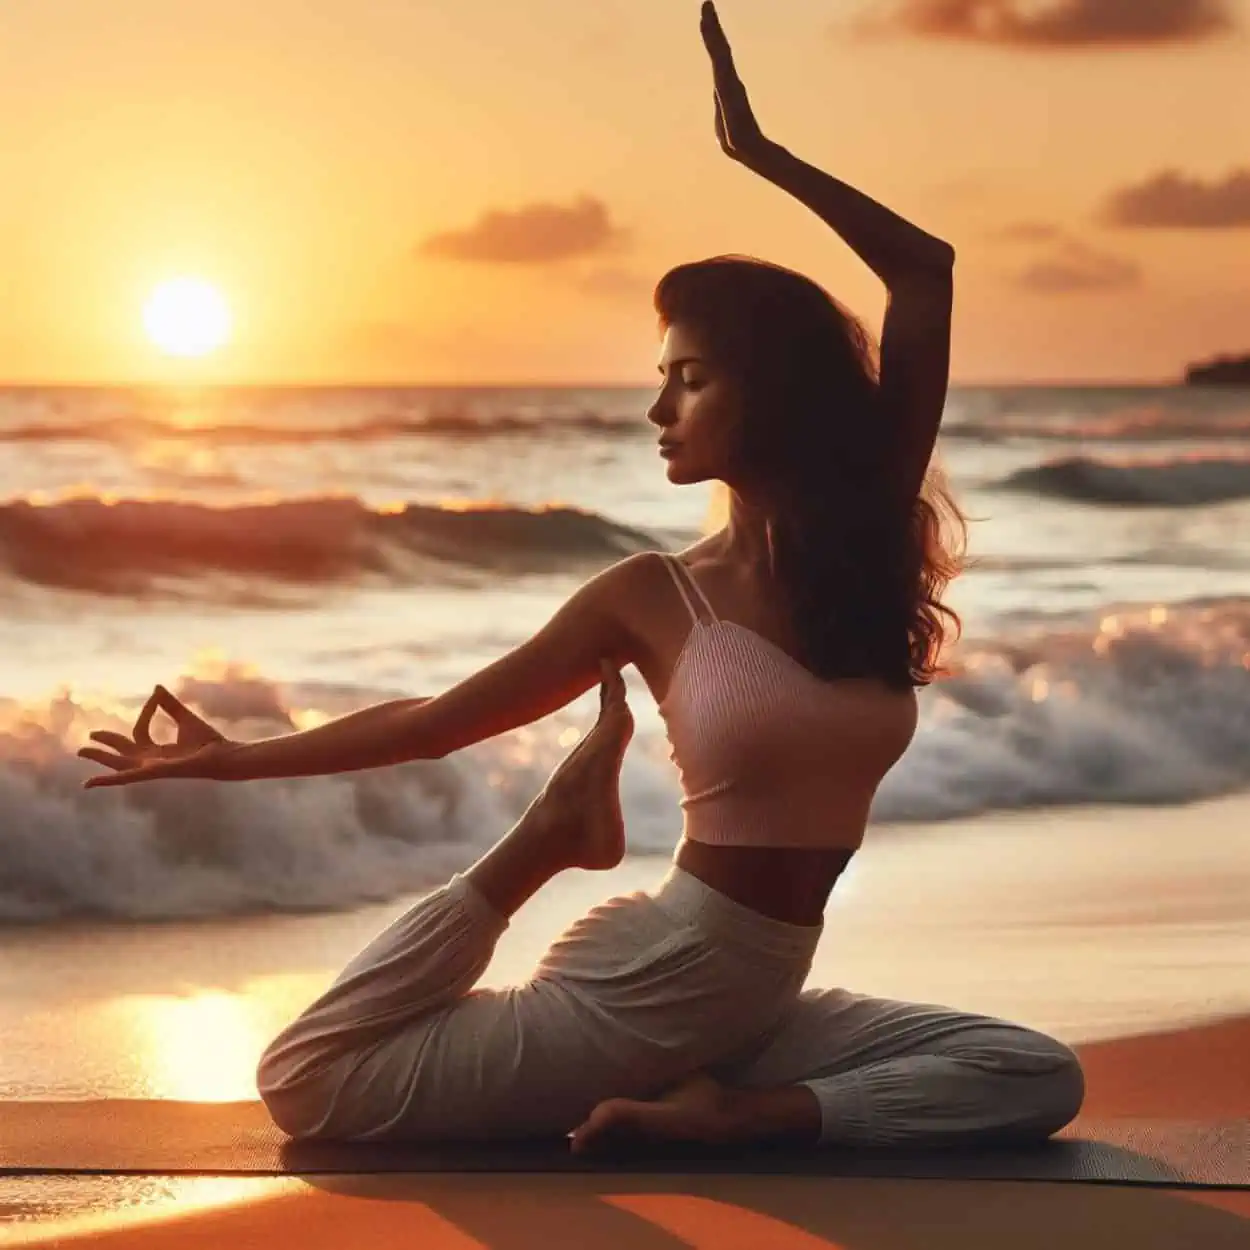 In this image a girl is doing yin yoga on the beach to increase flexibility